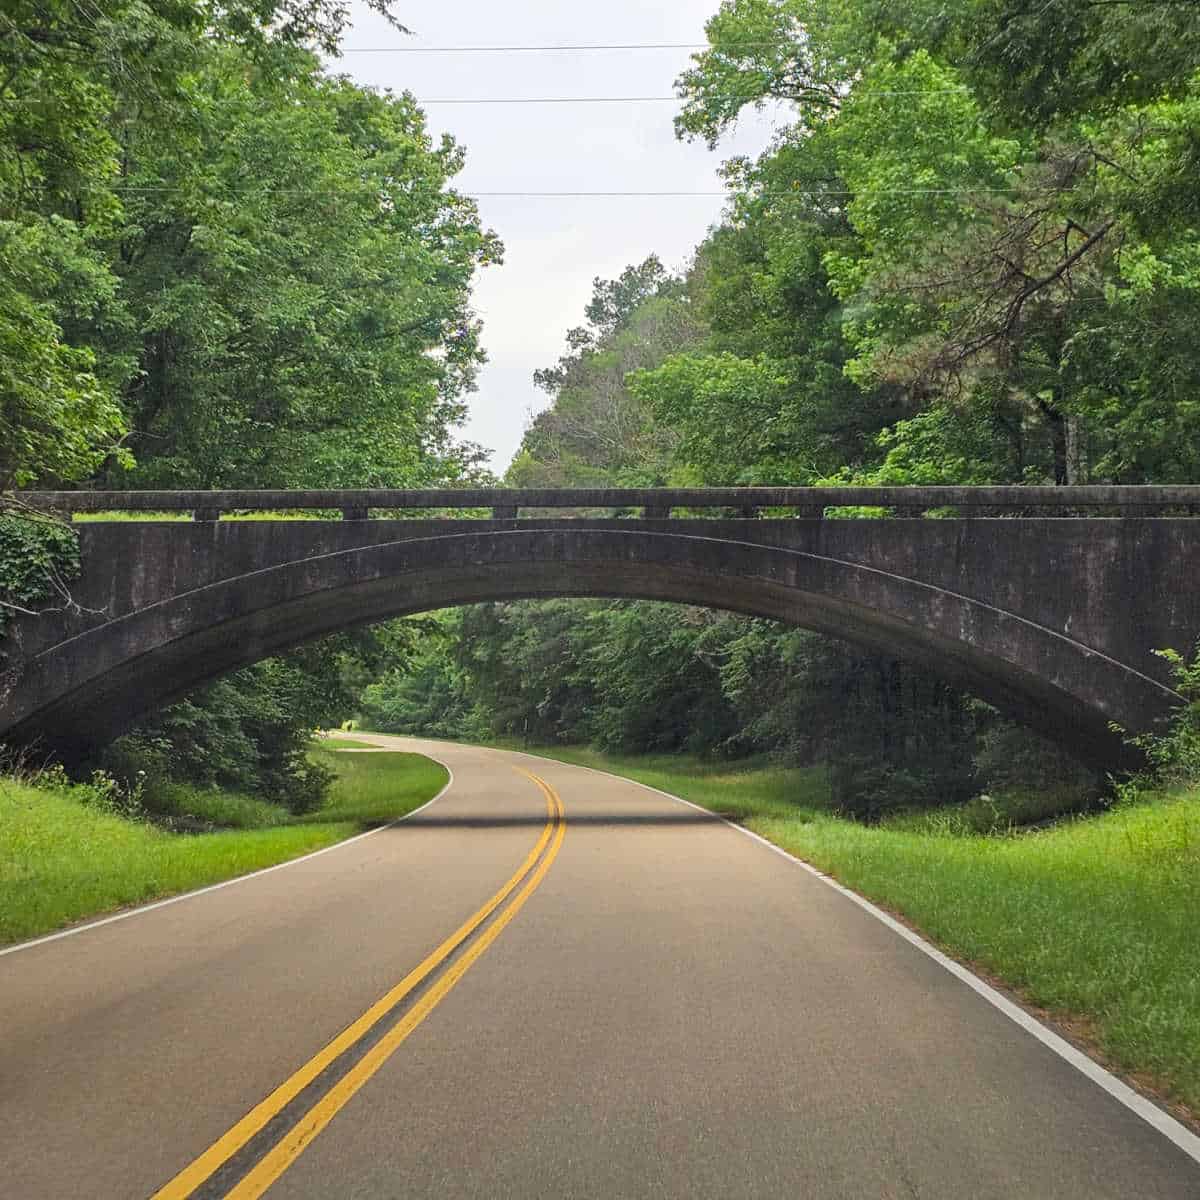 Bridge over the Natchez Trace Parkway with trees on both sides